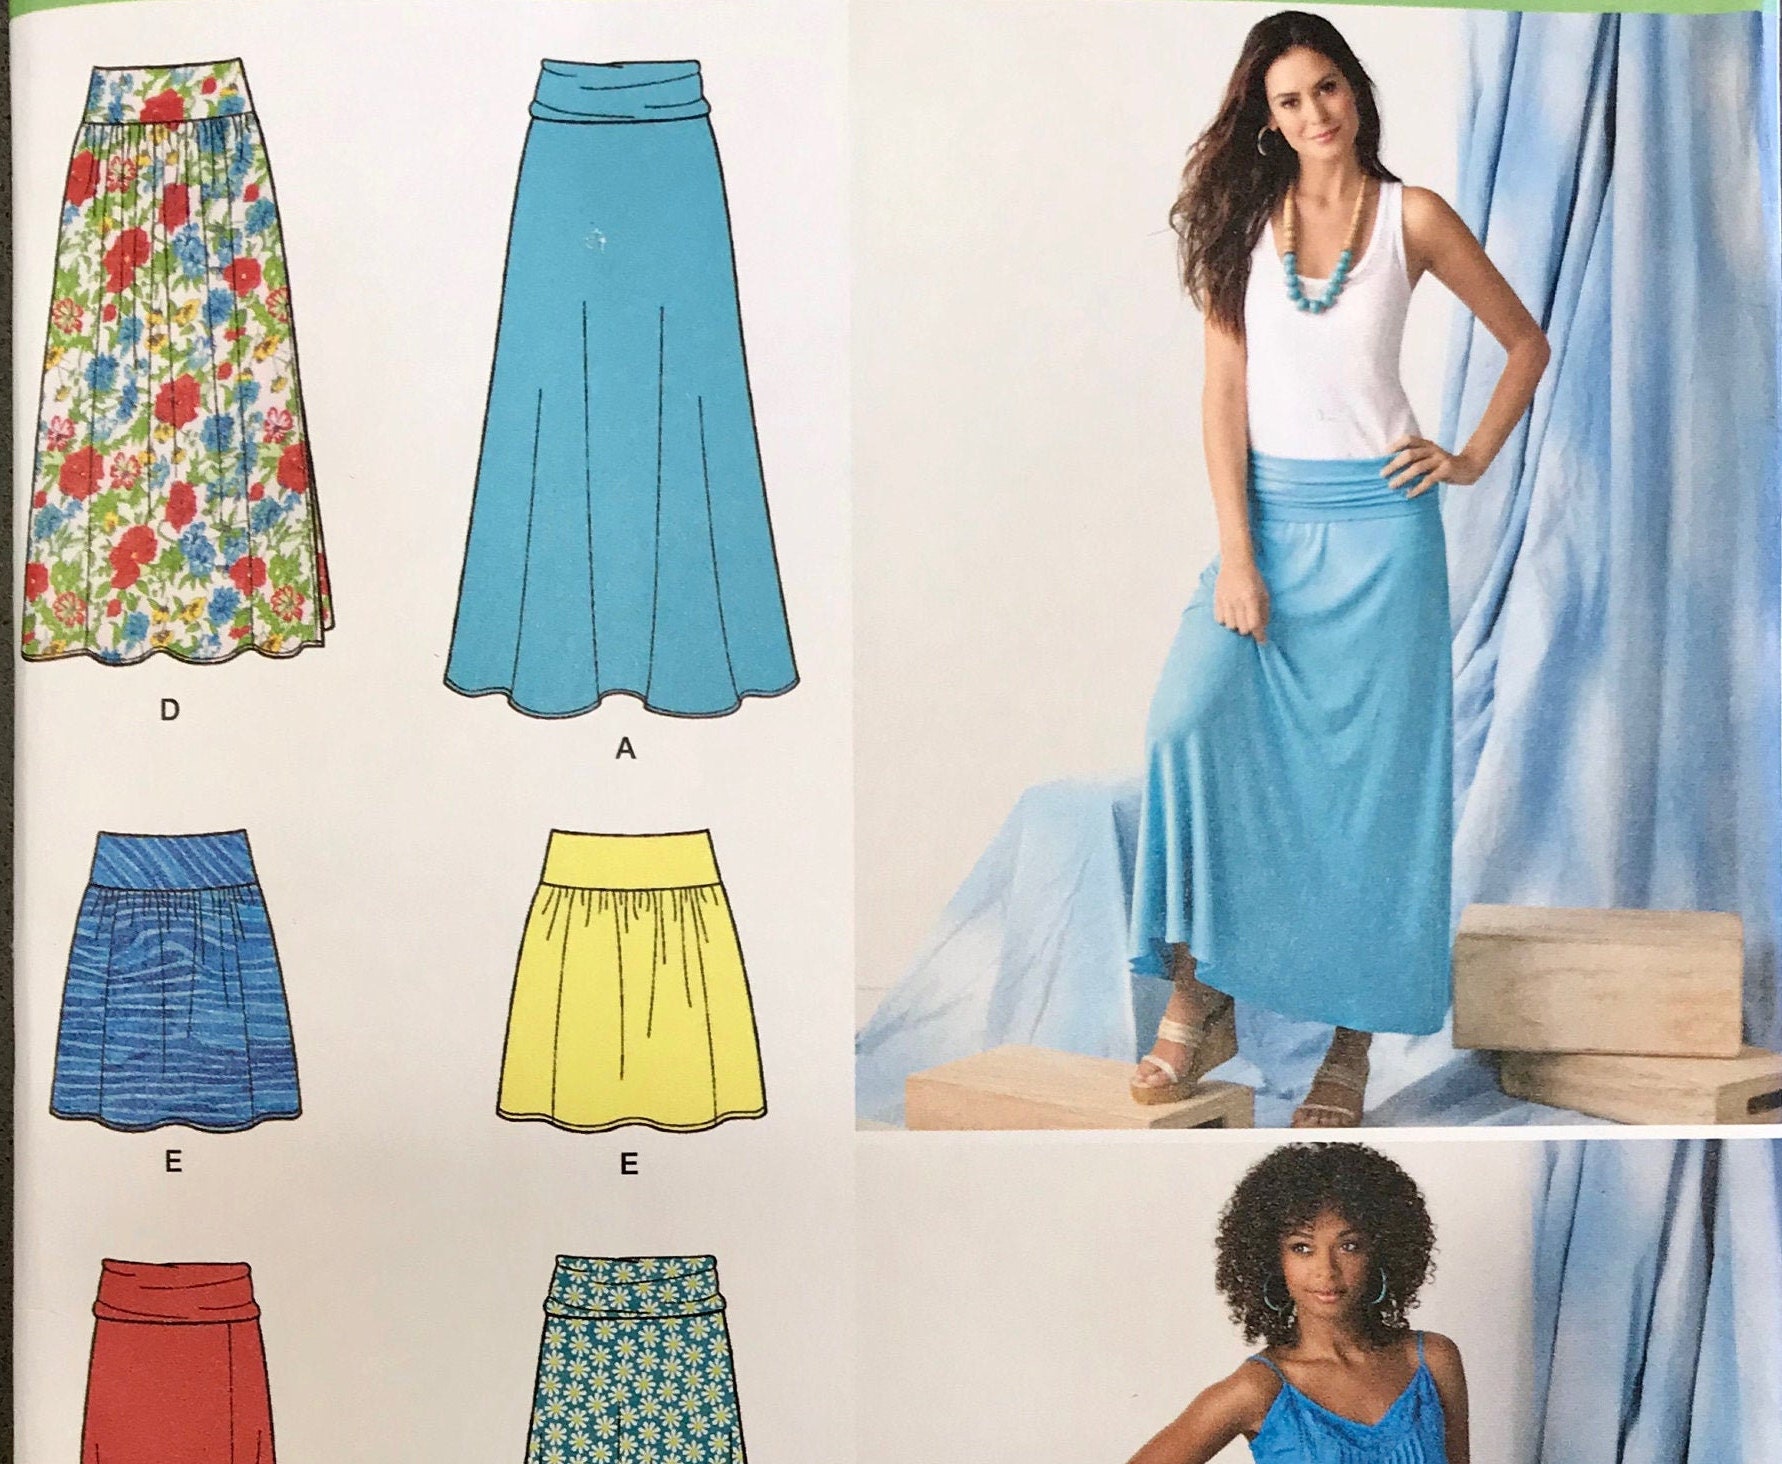 2013 Simplicity 1616 women's easy to sew knit skirts in | Etsy